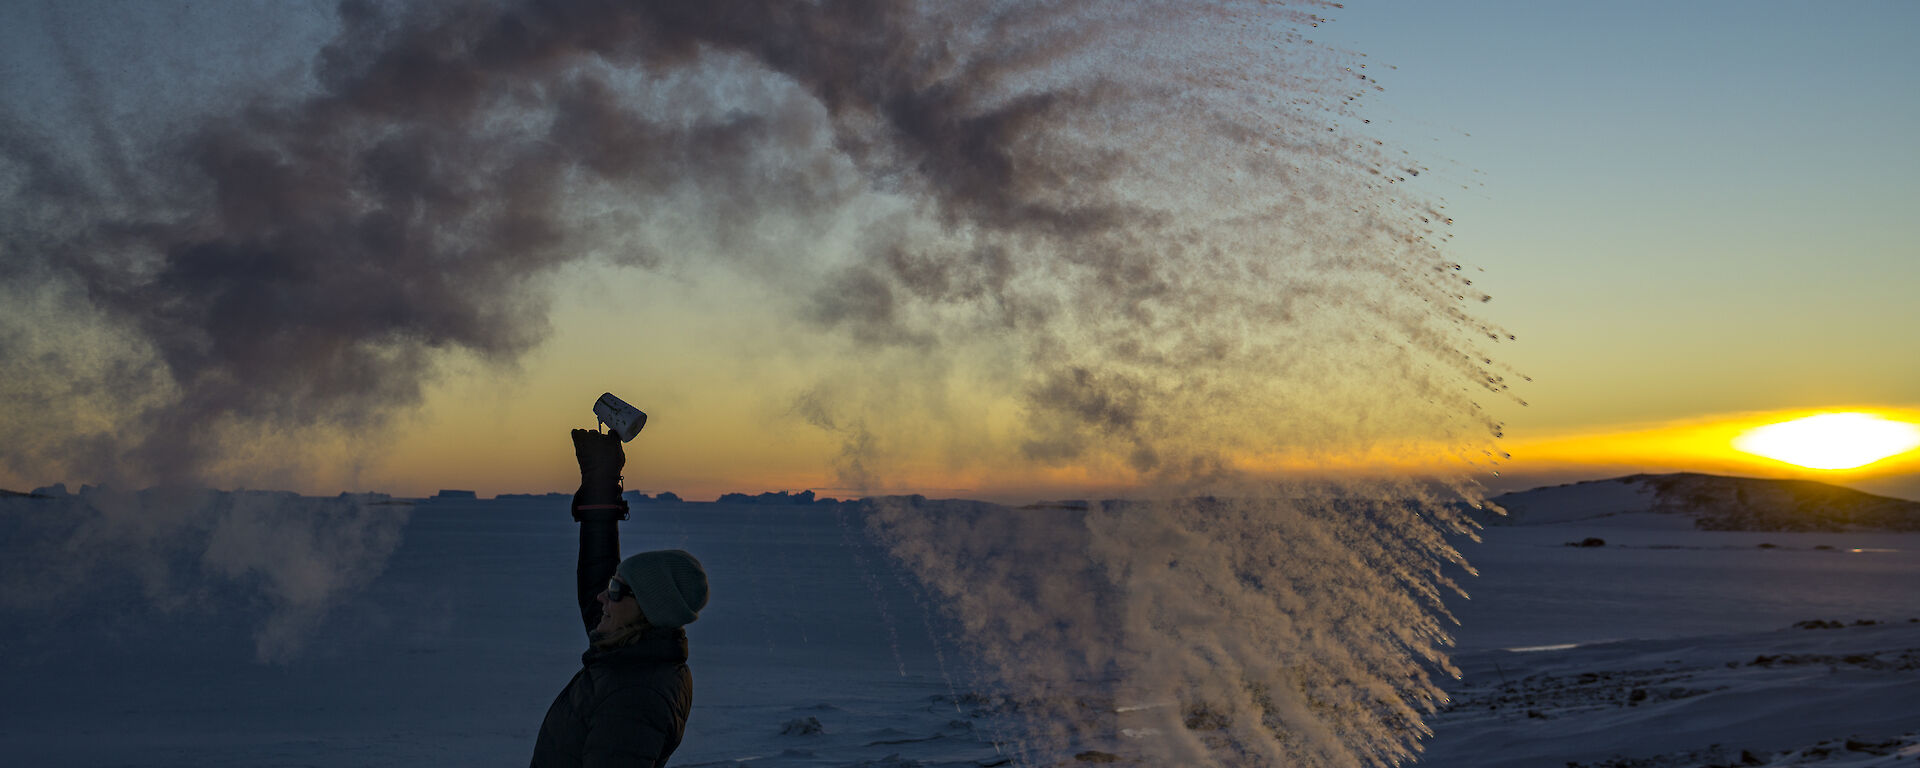 A woman stands in a wave of frozen water against a sunset